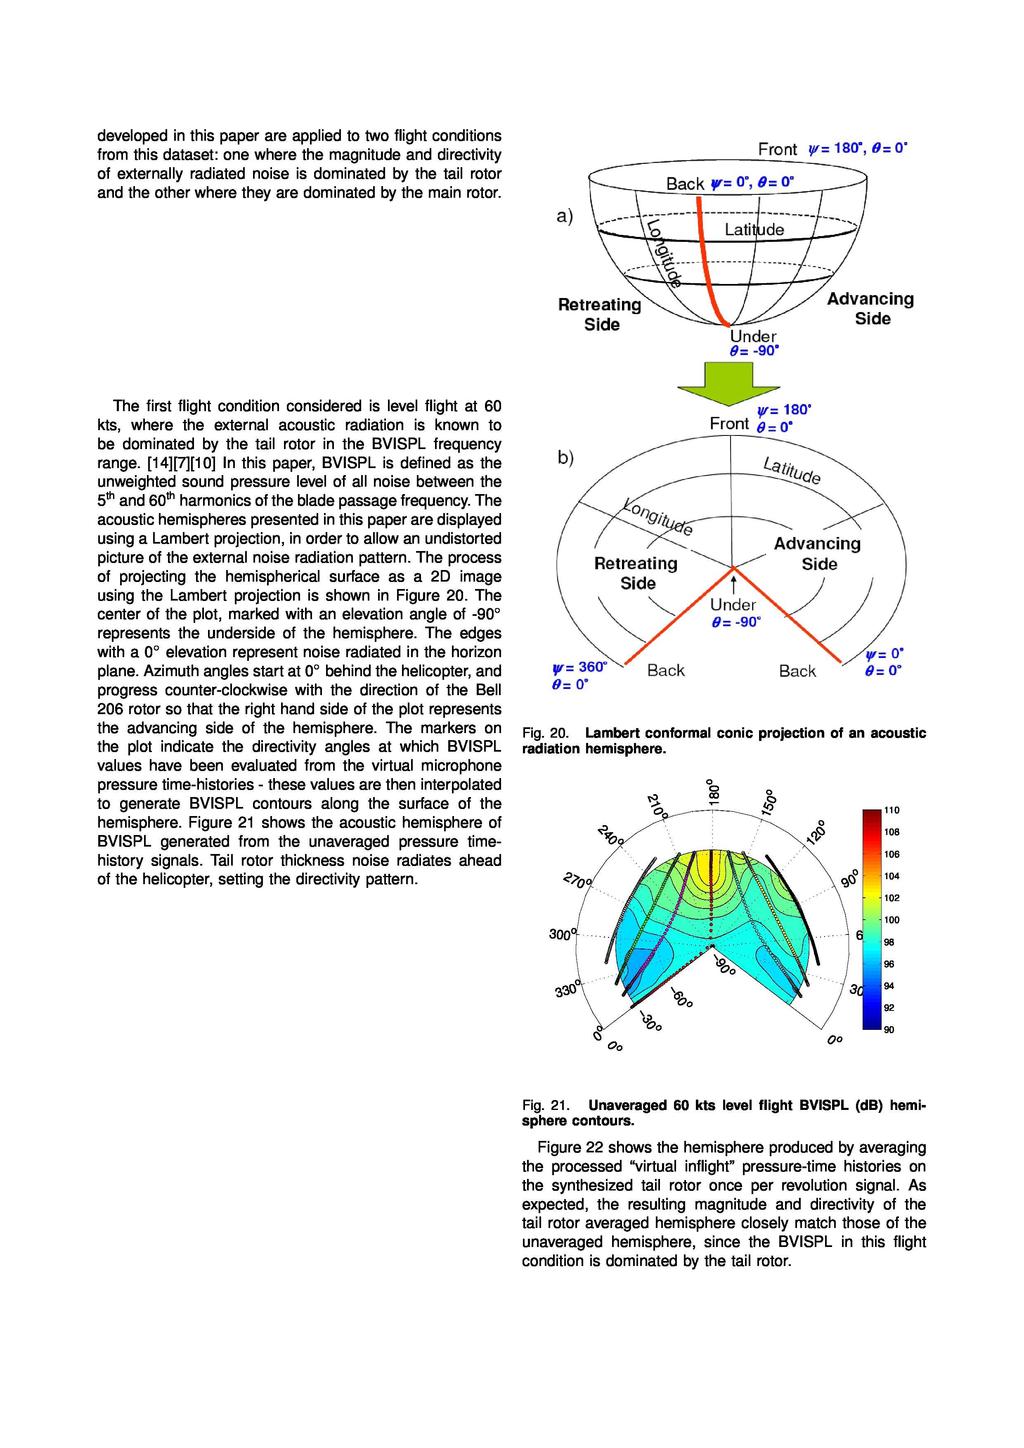 developed in this paper are applied to two flight conditions from this dataset: one where the magnitude and directivity of externally radiated noise is dominated by the tail rotor and the other where